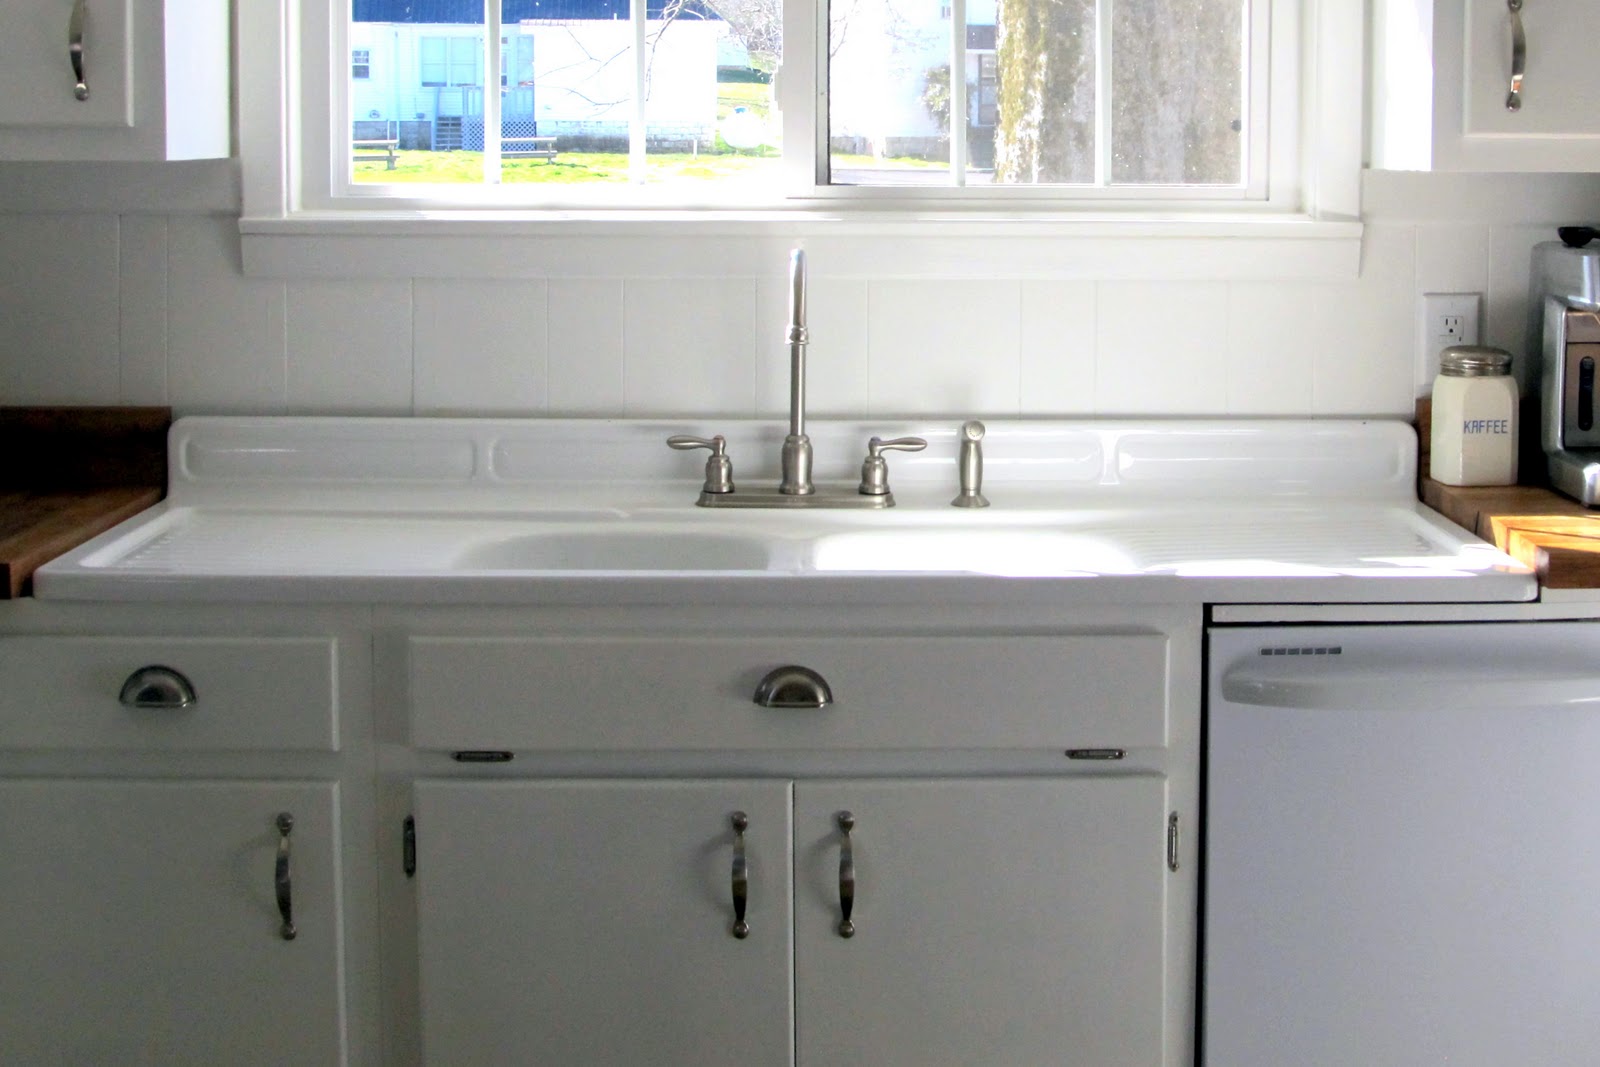 Kitchen With And Traditional Kitchen With White Counter And Vintage Kitchen Sinks Under White Framed Glass Windows Kitchens Simple Undermount Stainless Steel Kitchen Sinks You Have To Know